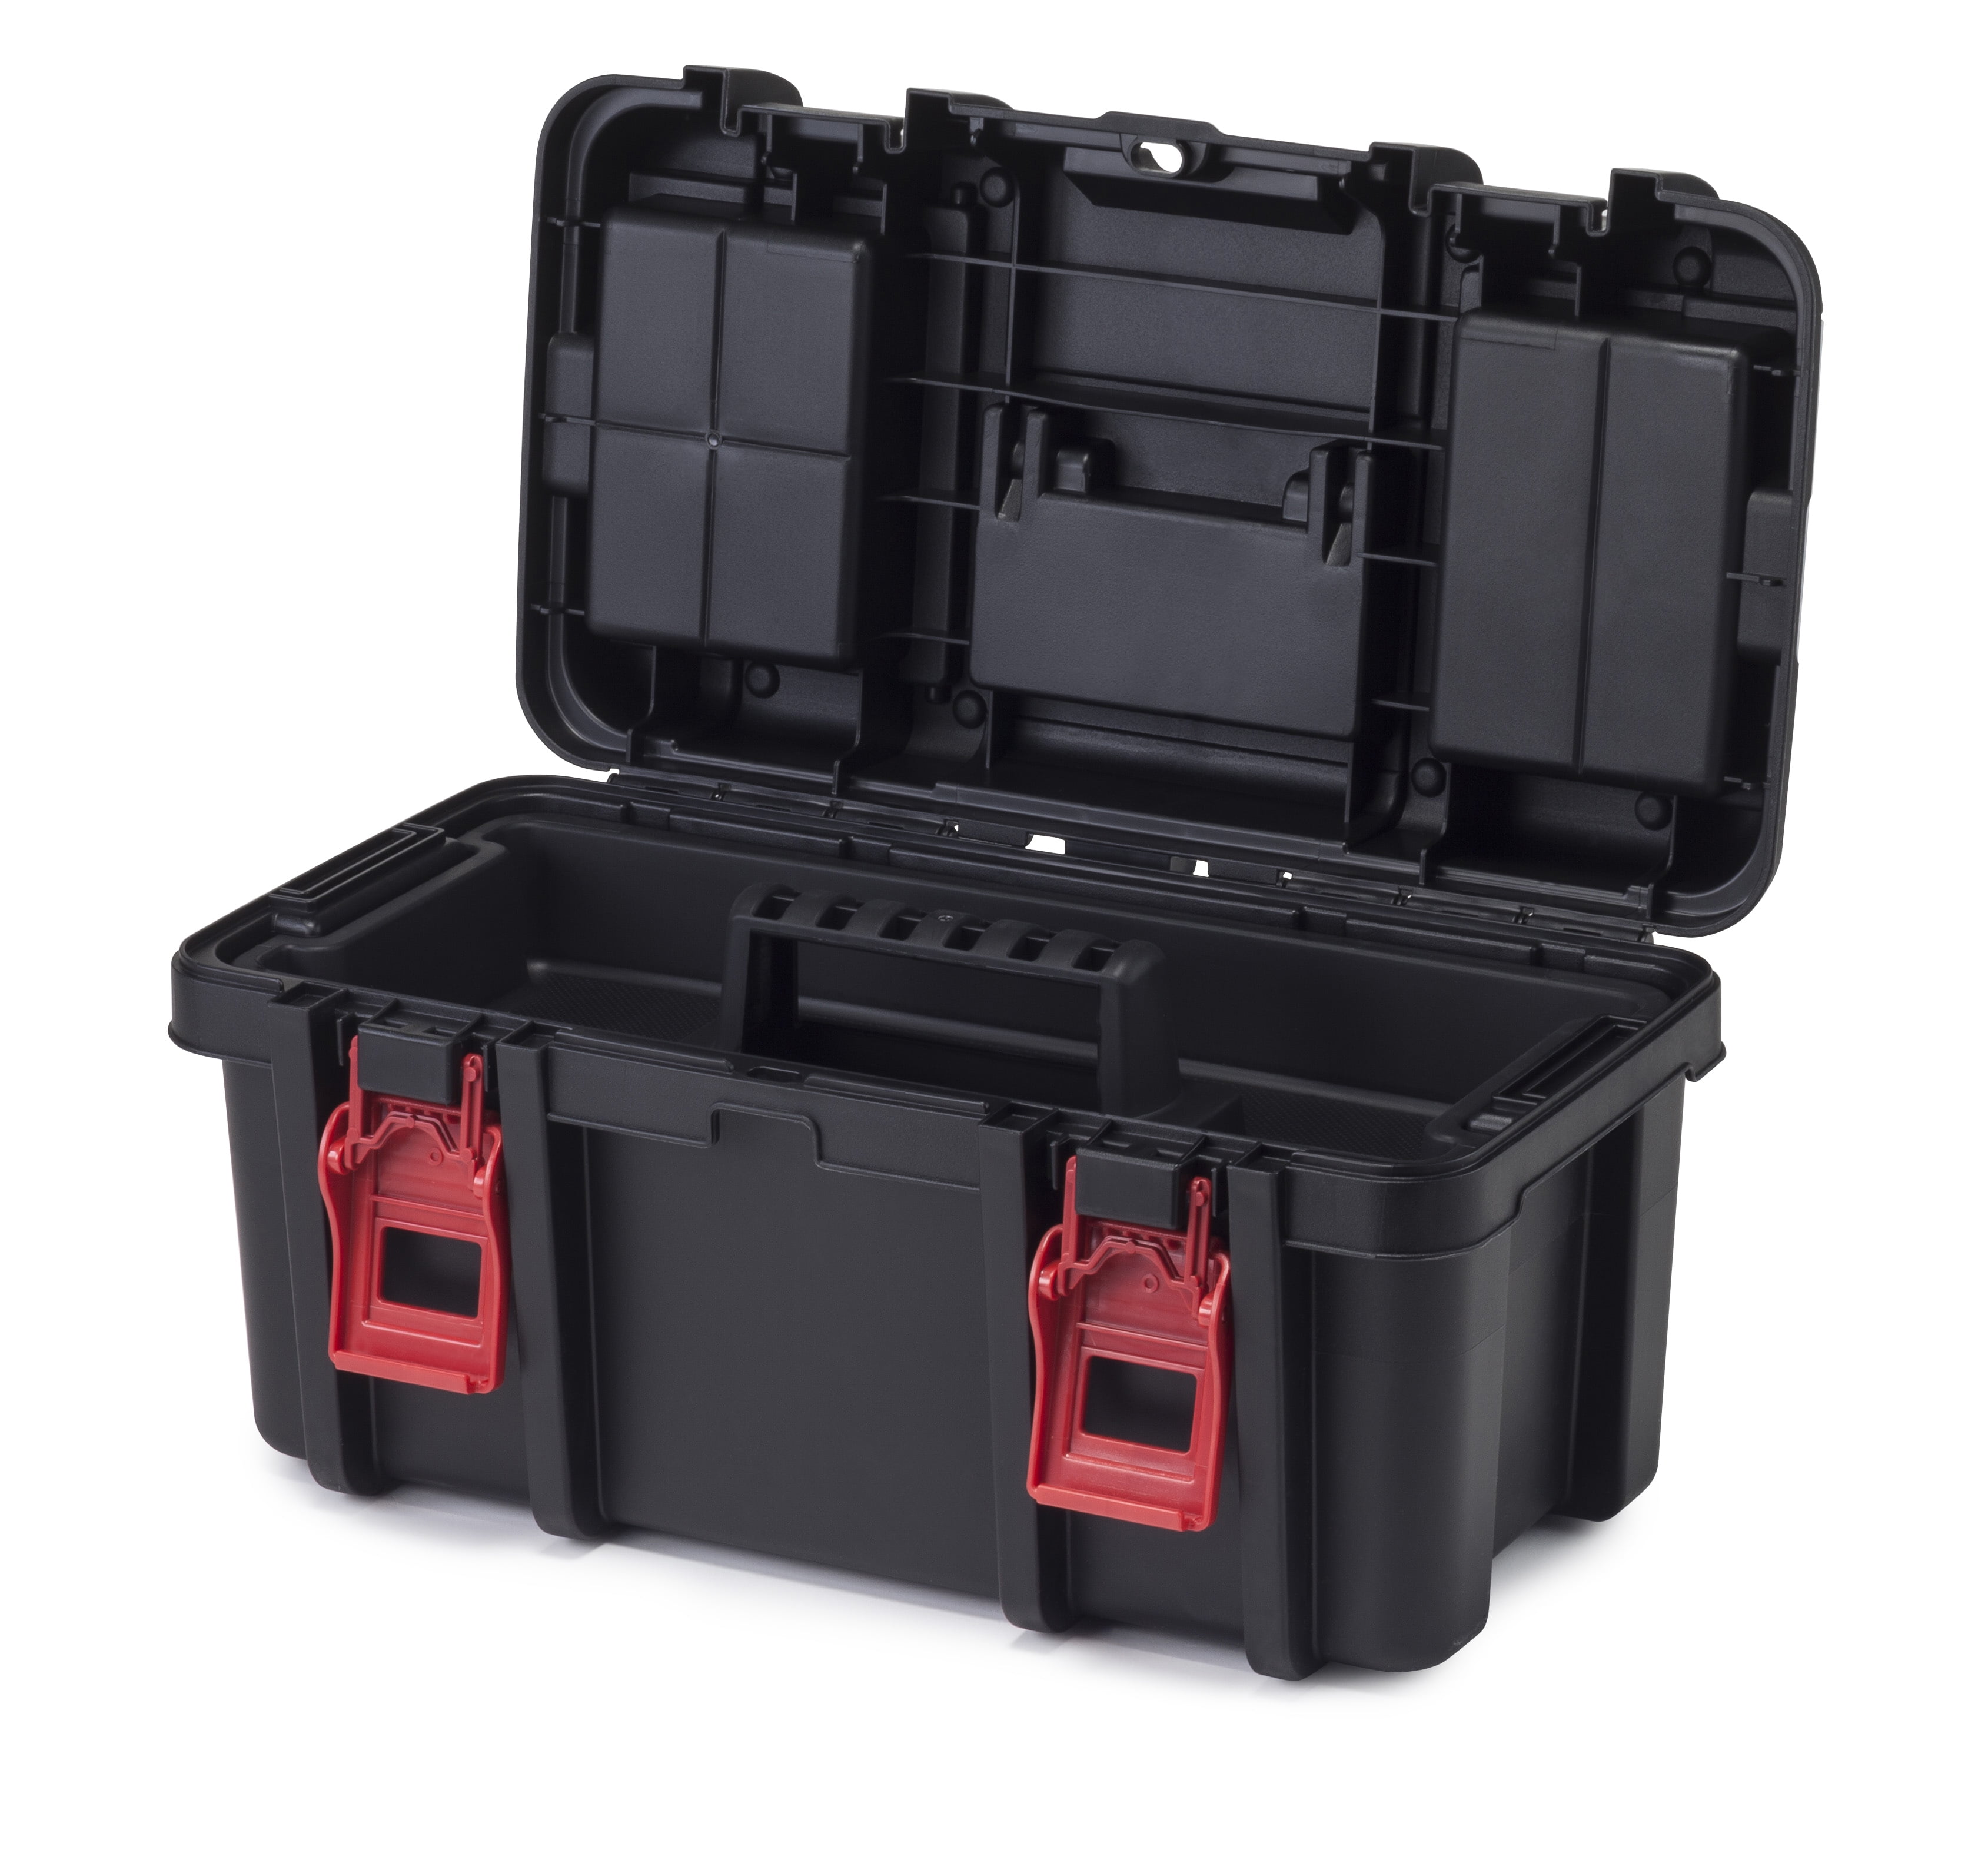 Hyper Tough 16-inch Toolbox, Plastic Tool and Hardware Storage